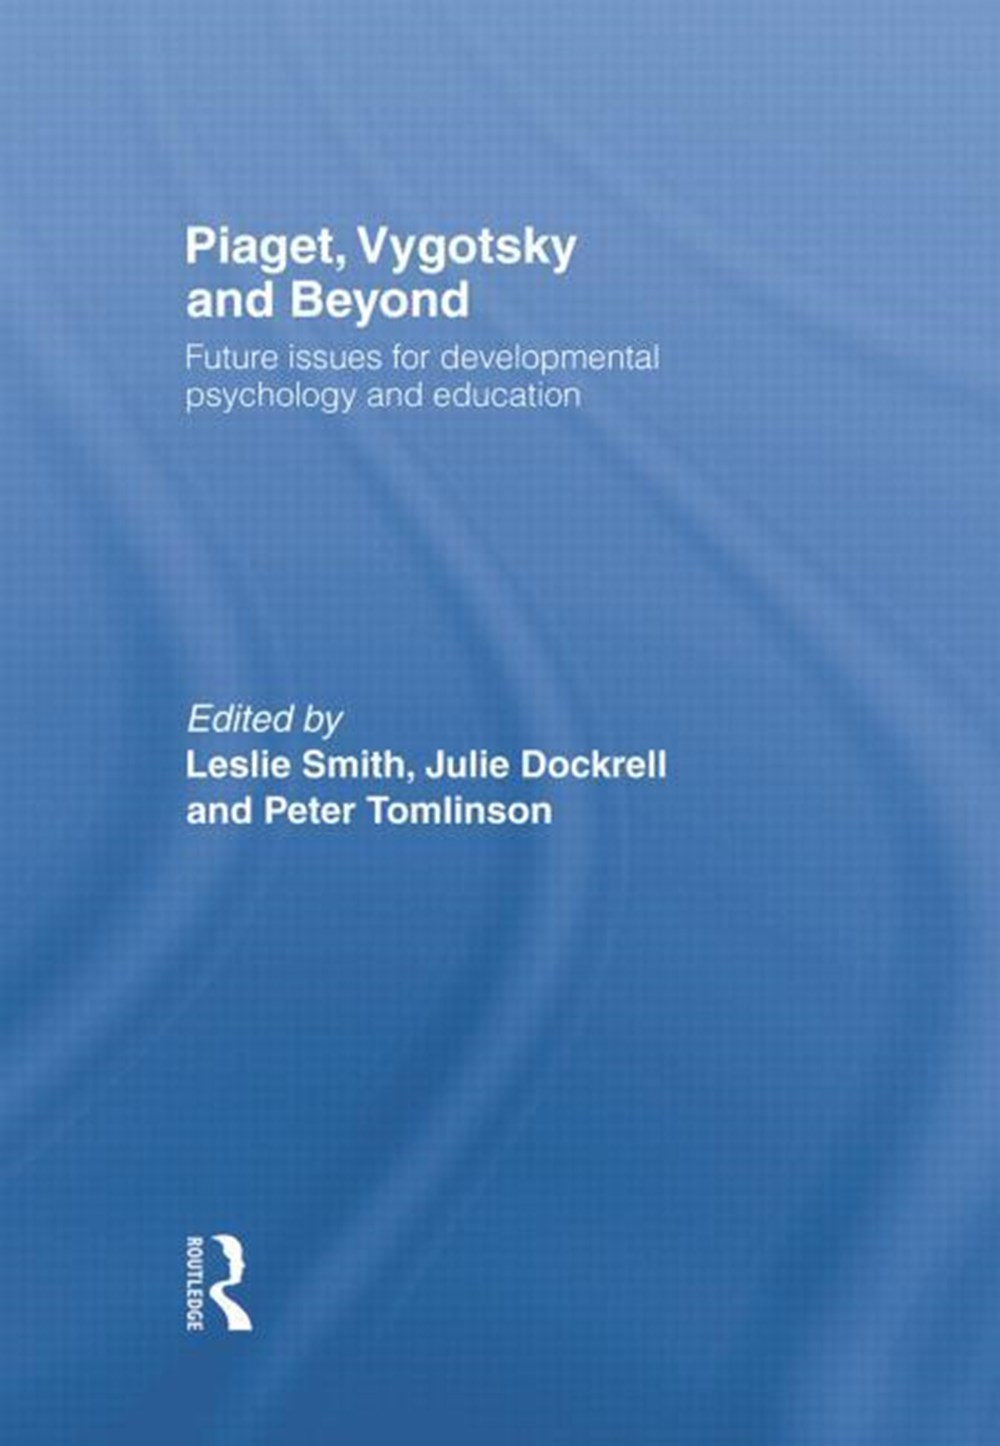 Piaget, Vygotsky & Beyond: Future issues for developmental psychology and education